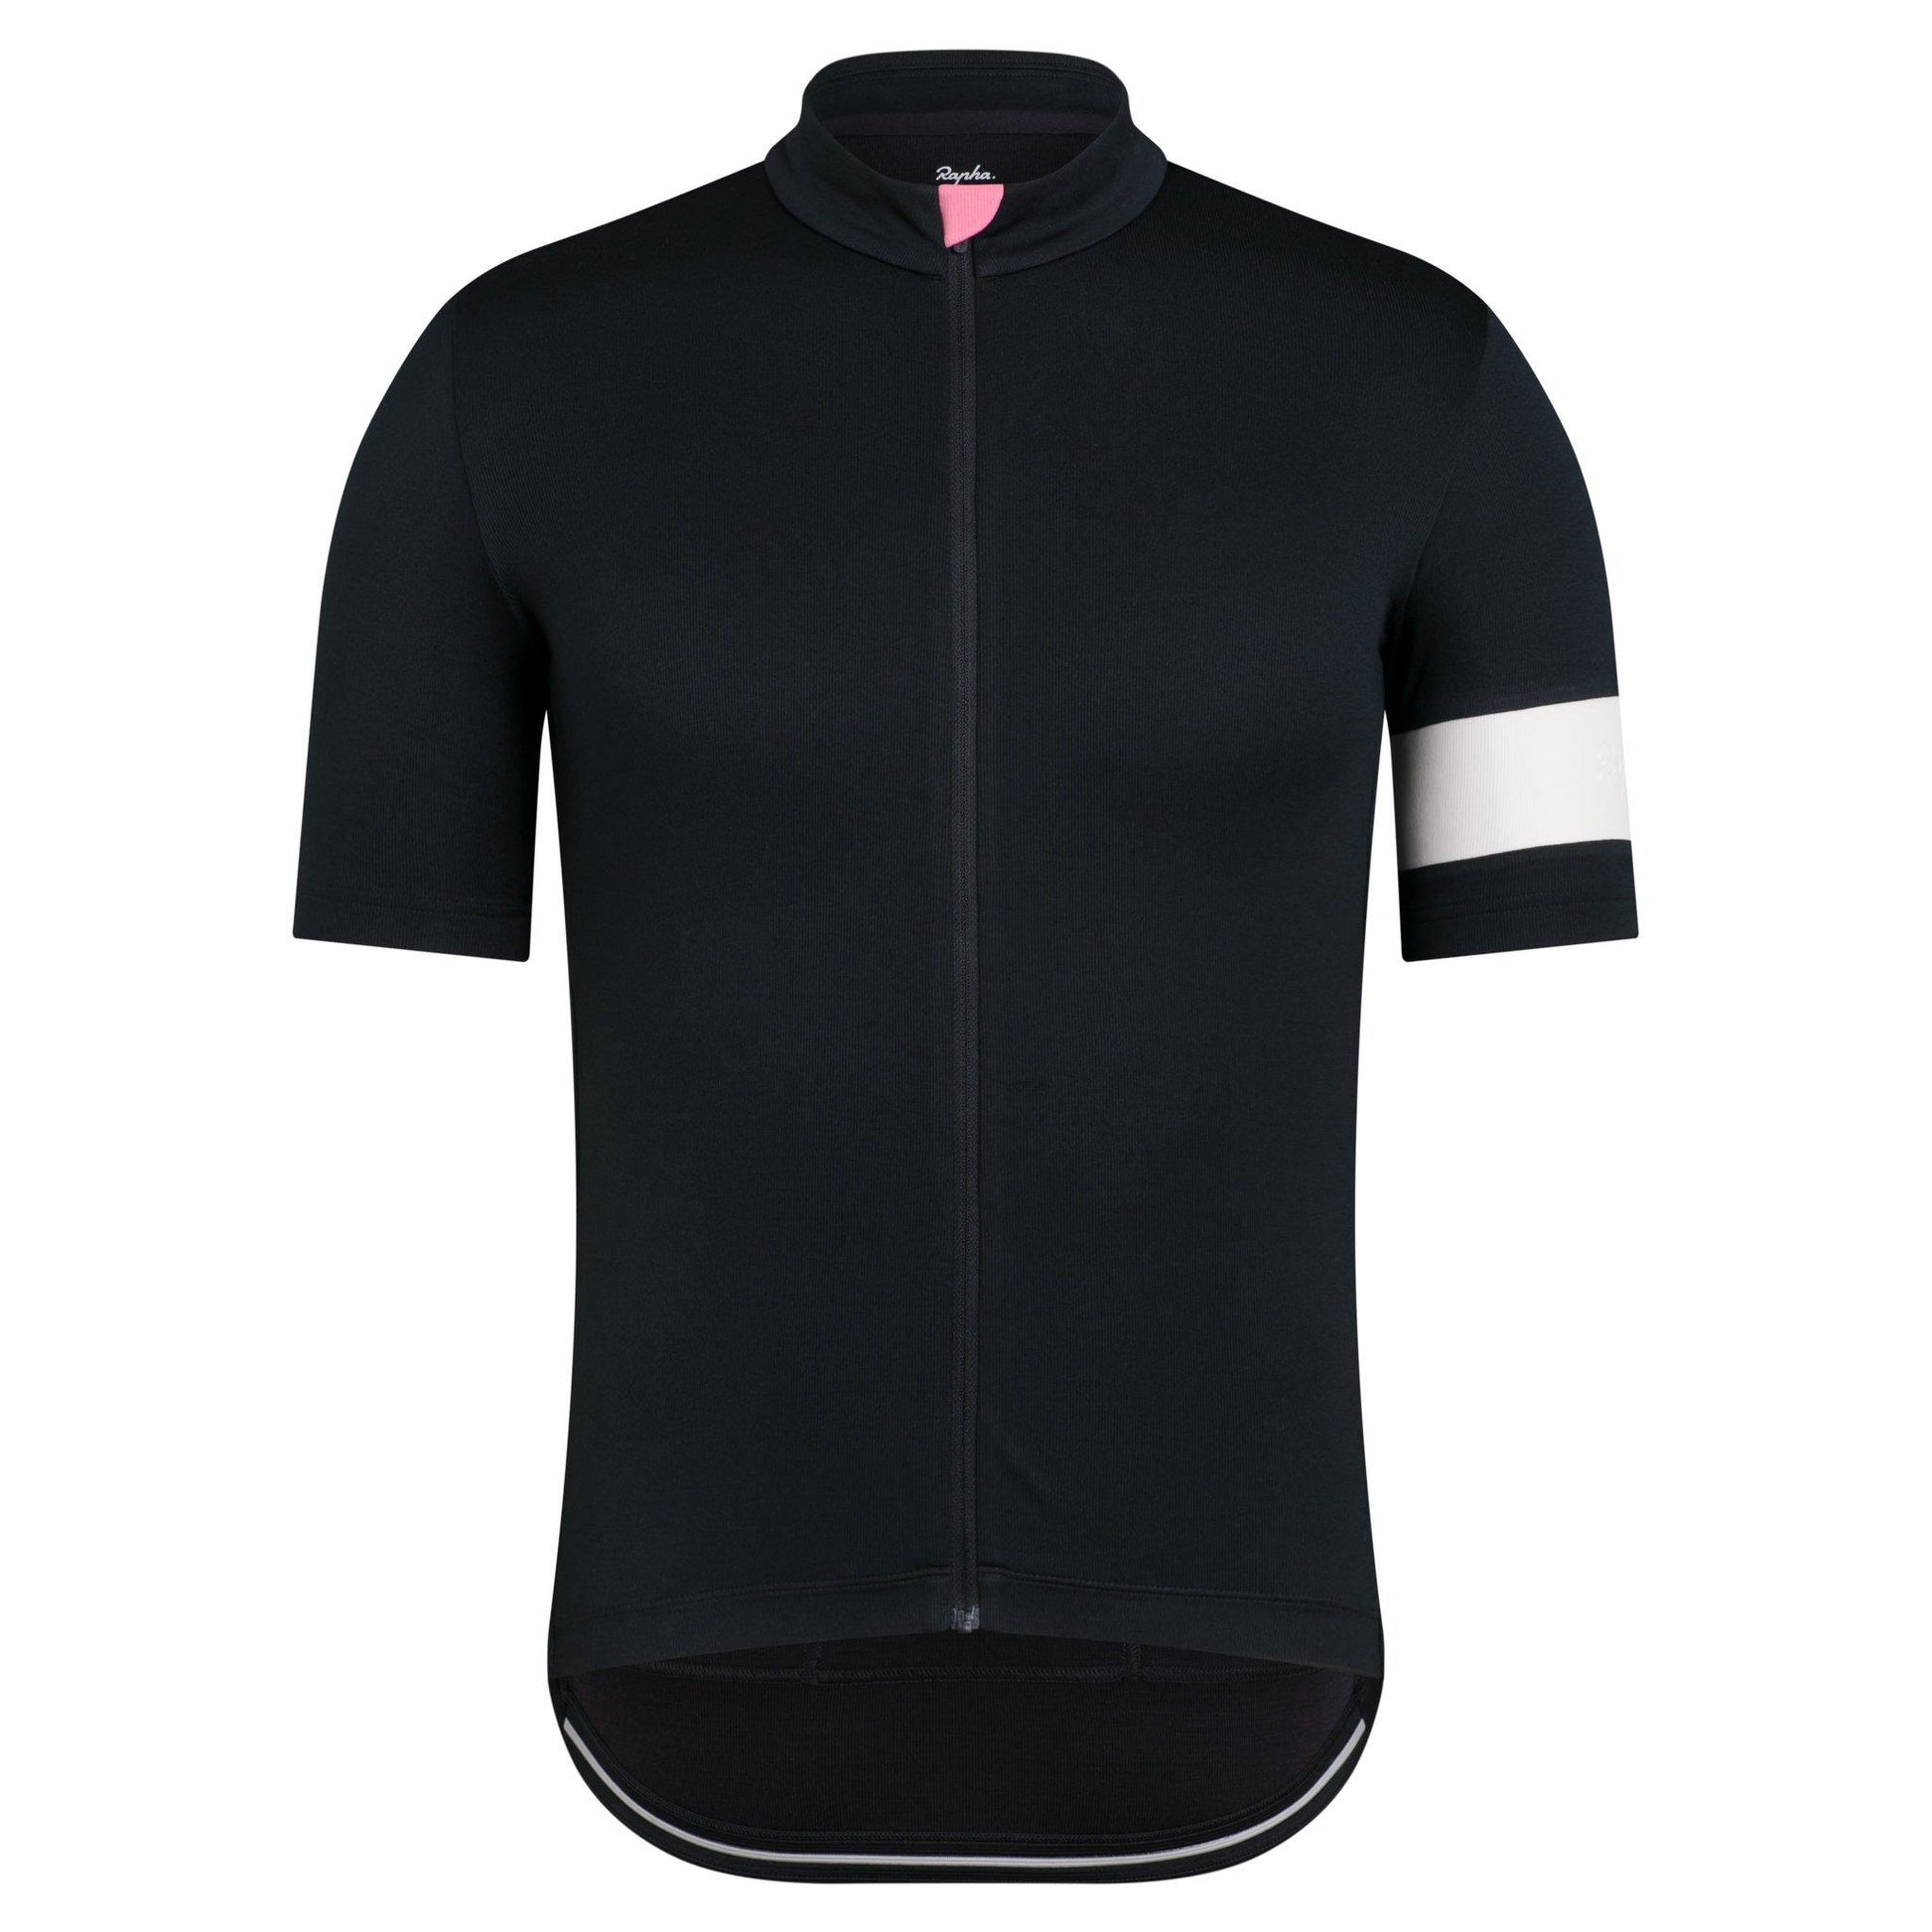 Rapha Mens Classic Jersey - Black buy online at Woolys Wheels Sydney with free delivery